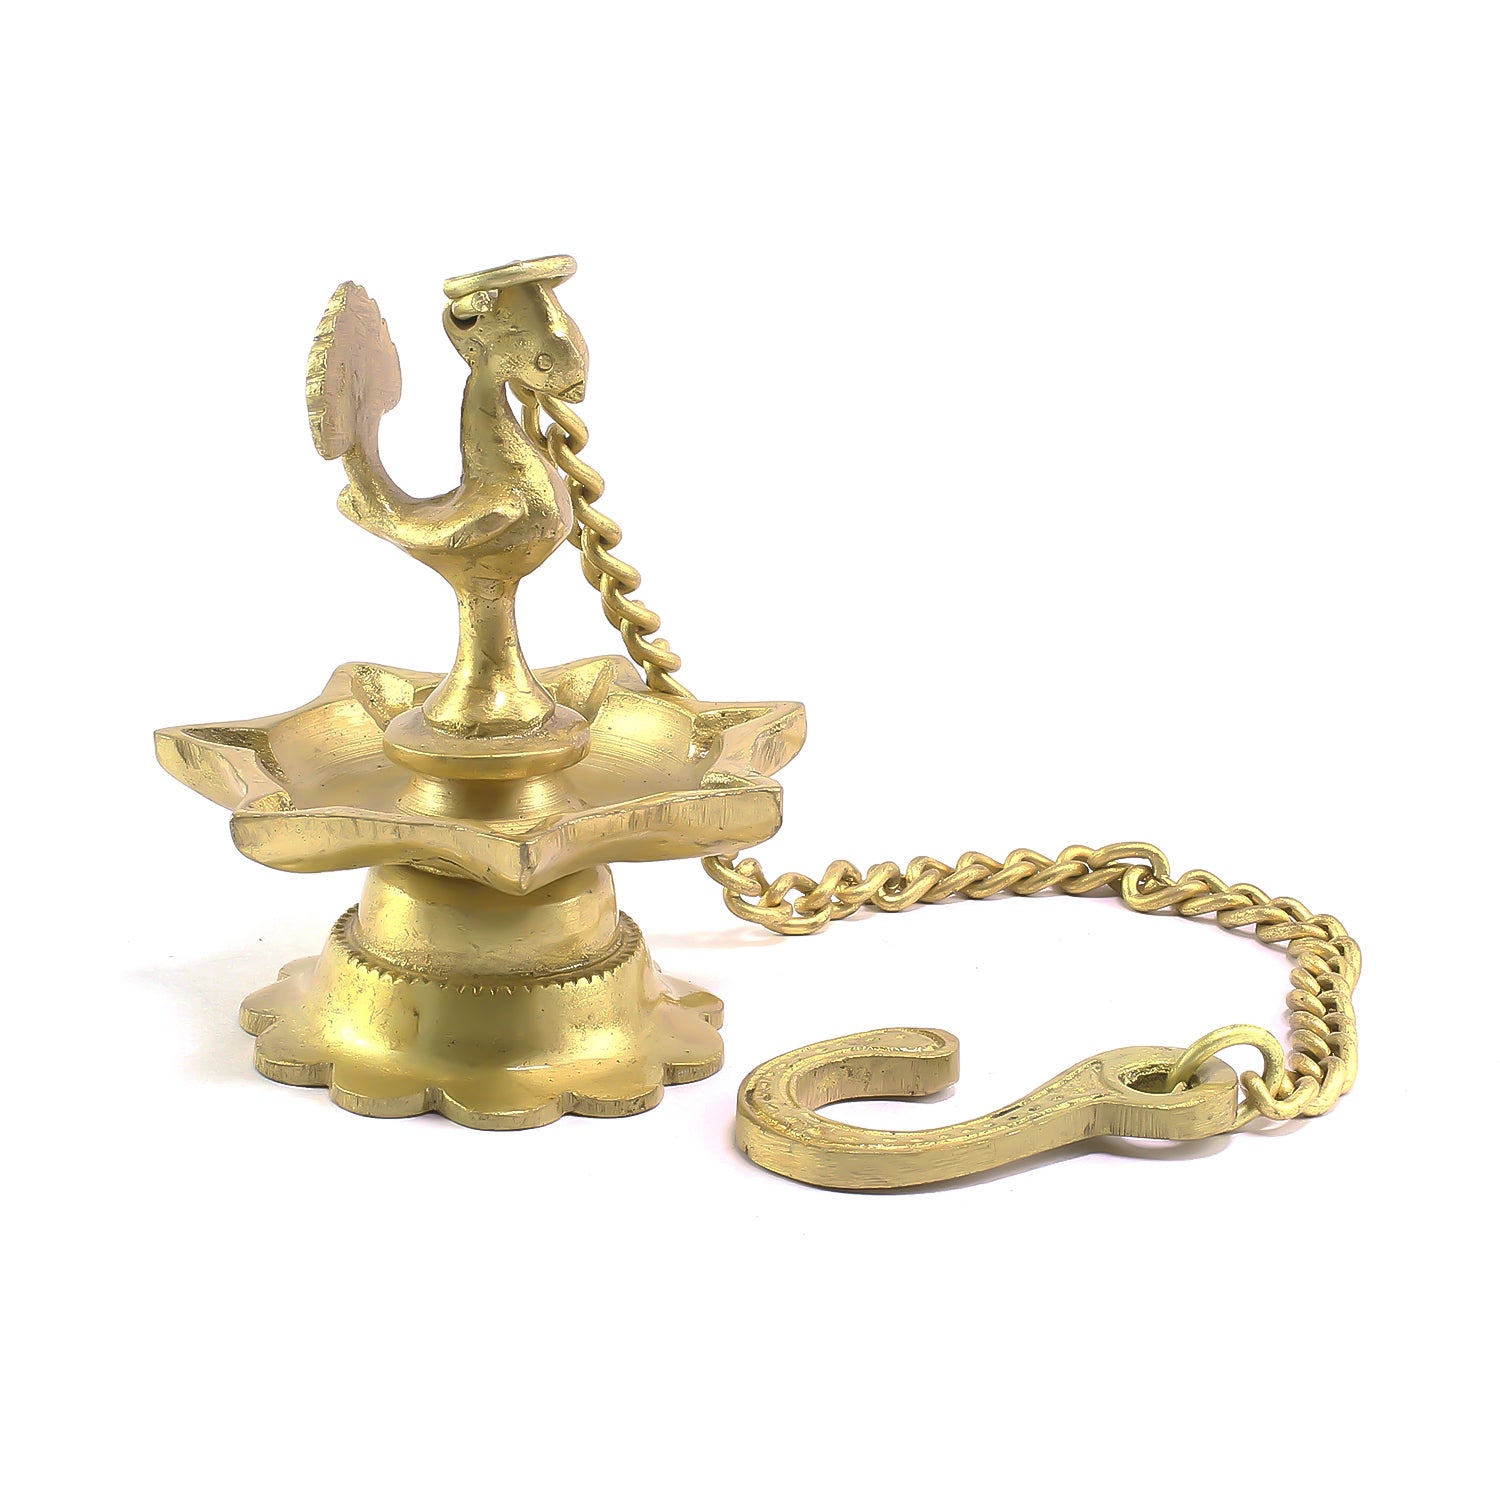 7 Wicks Decorative Peacock Brass Diya With Bell Wall Hanging With Chain 3